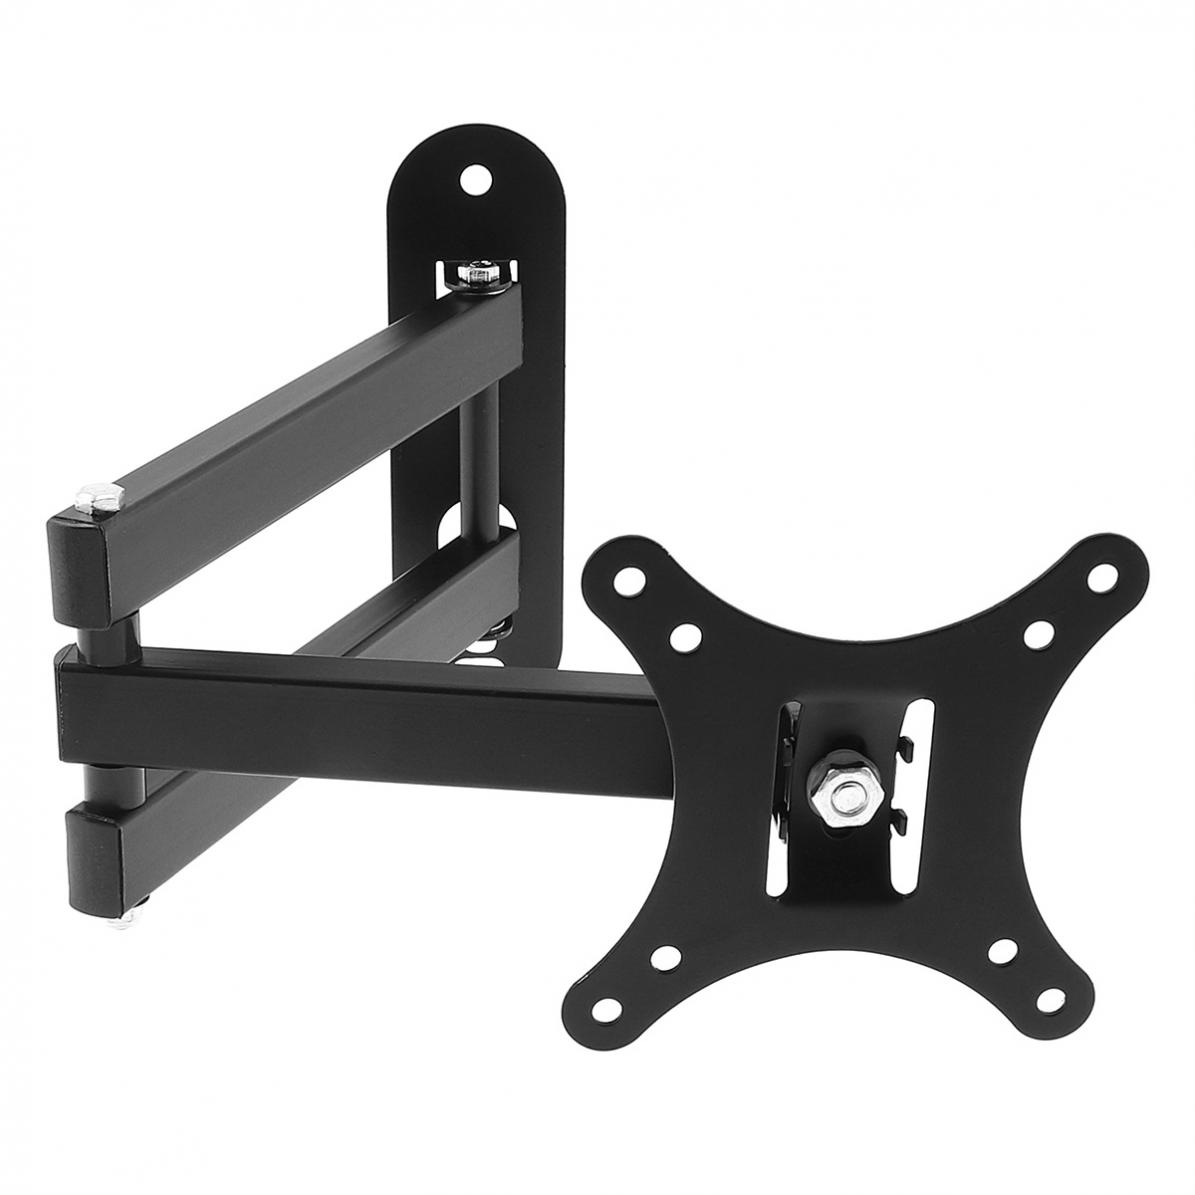 10KG Adjustable TV Wall Mount Bracket Flat Panel TV Frame Support 10 Degrees Tilt with Small Wrench for LCD LED Monitor Flat Pan